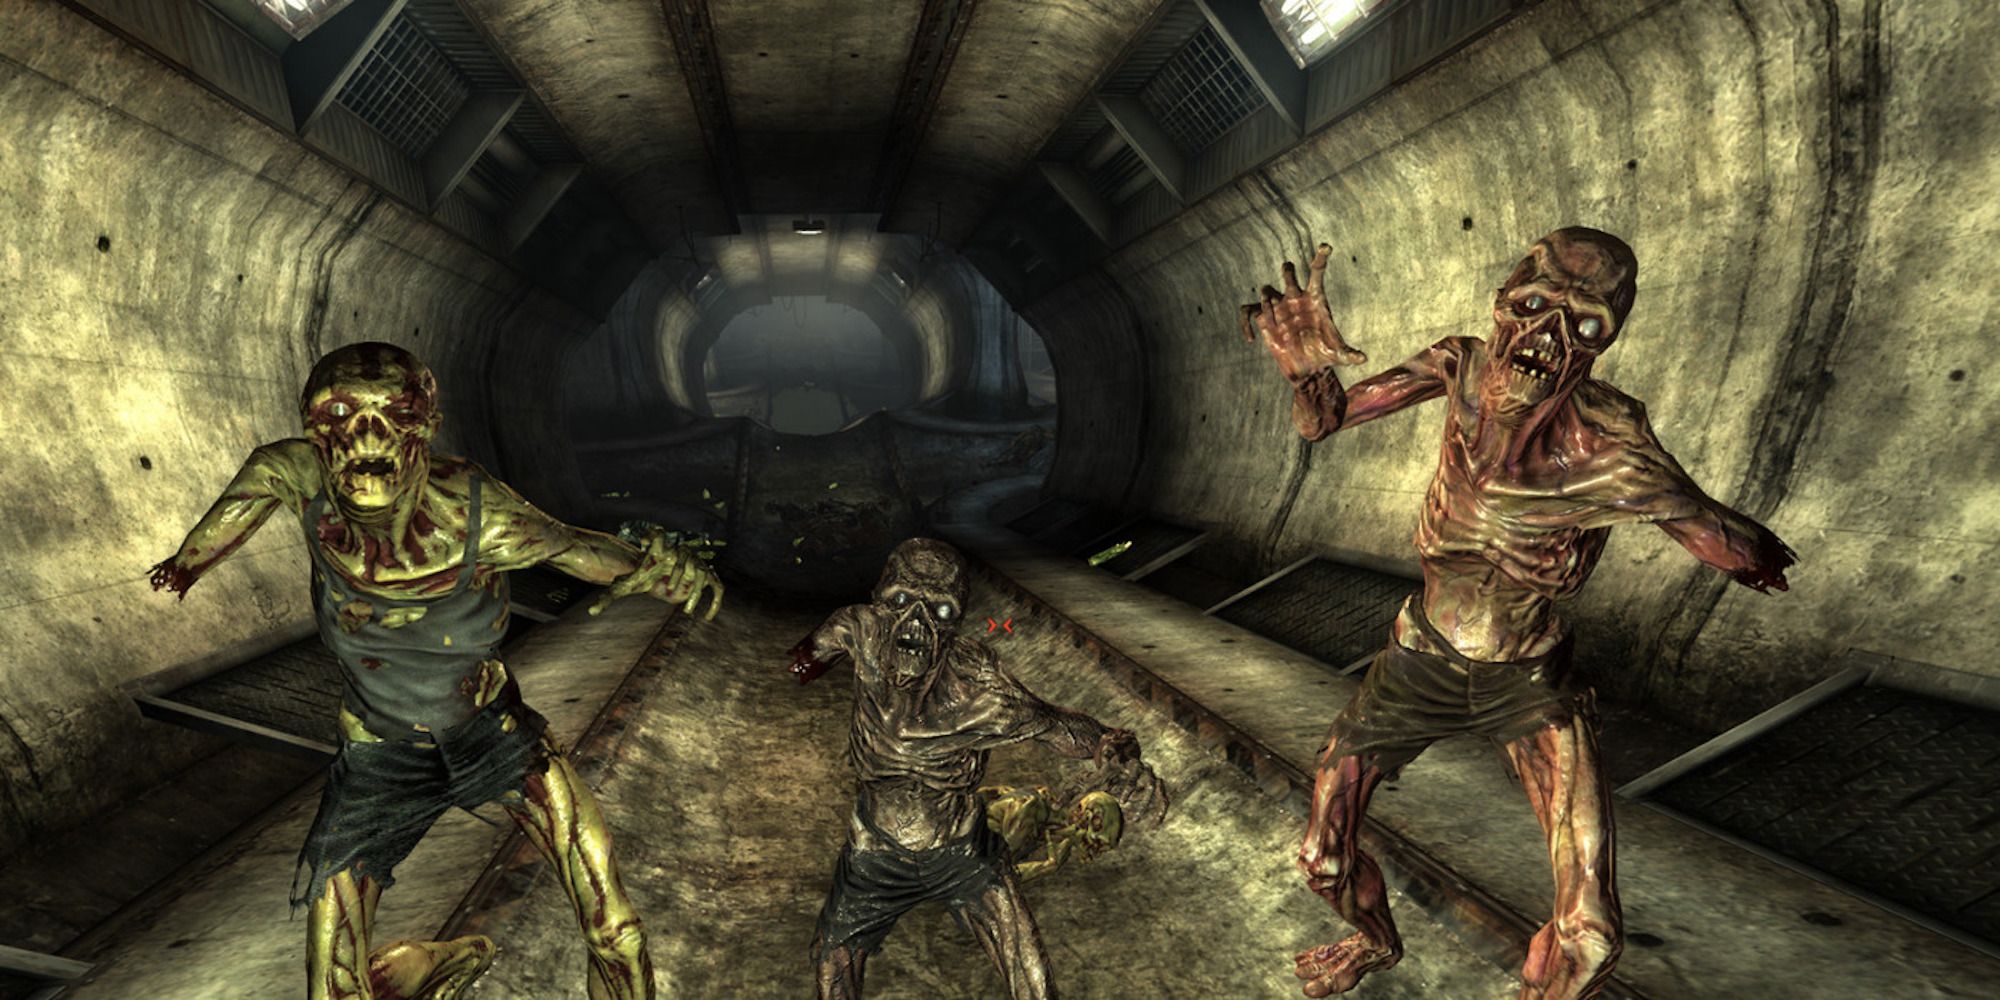 Fighting enemies in Fallout 3